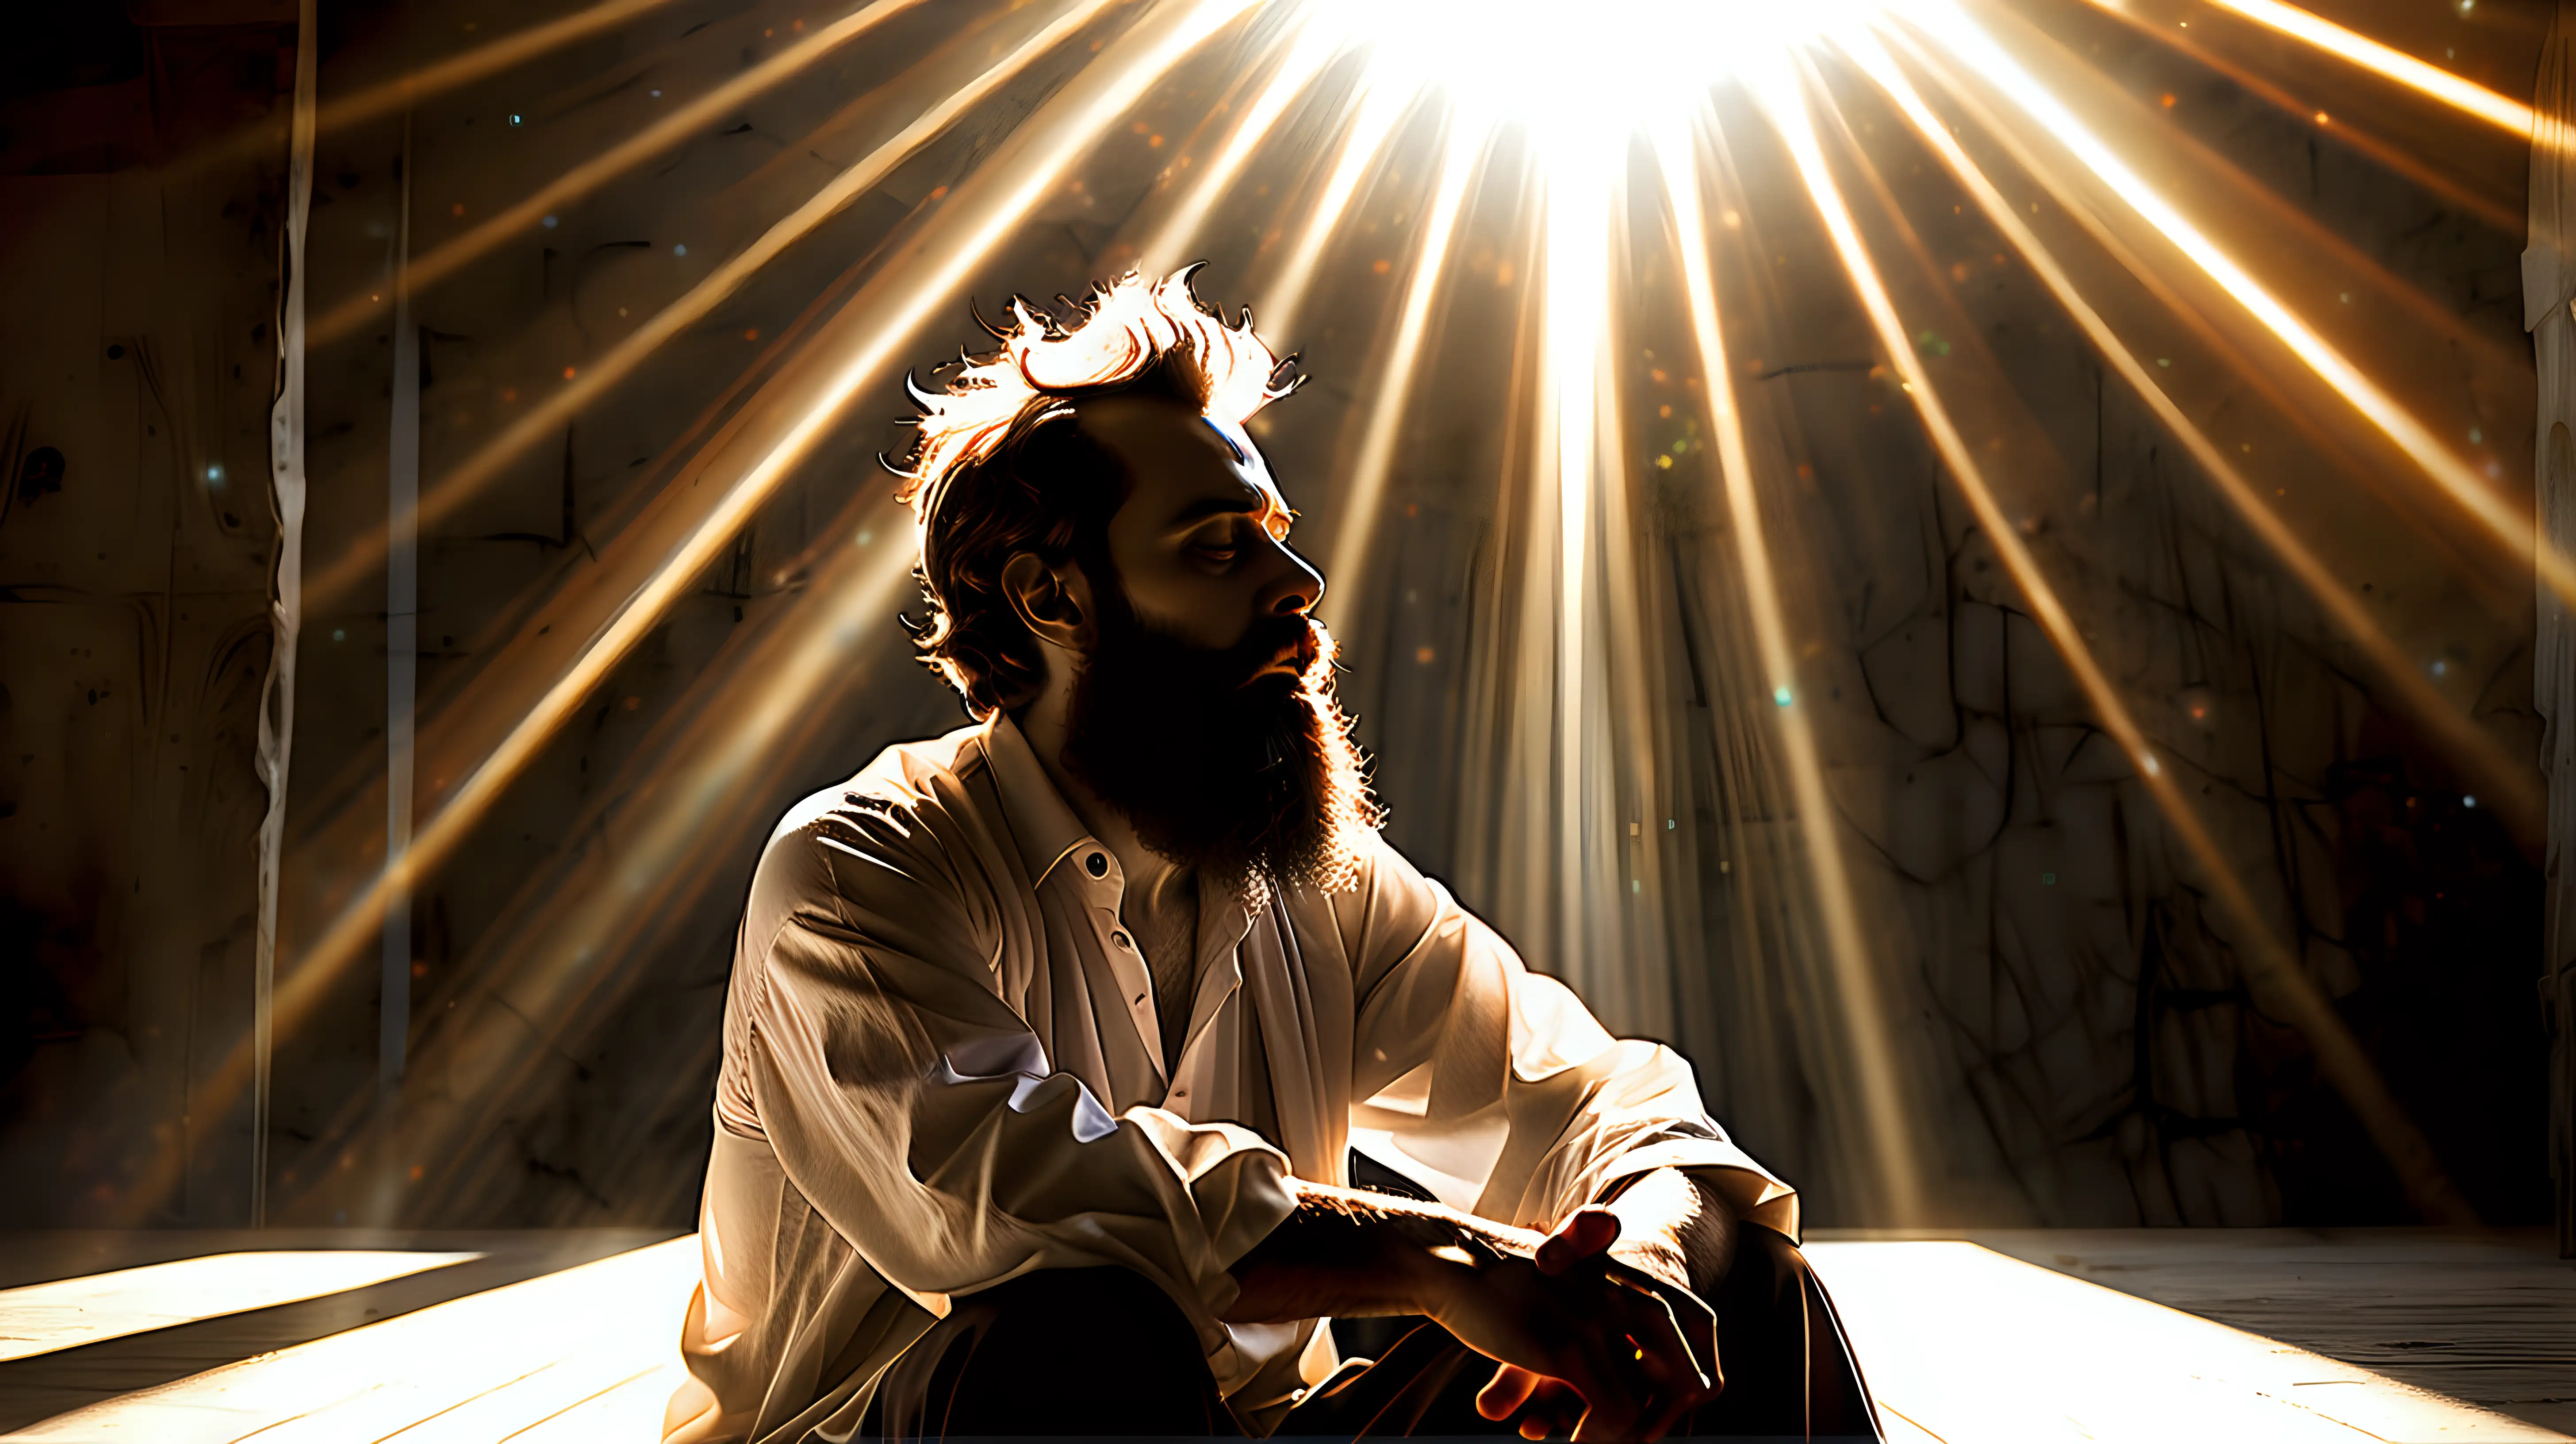 /imagine prompt: An image of a moment of enlightenment as a bearded man with an aura of wisdom touches the head of a seated, pensive person in a modern setting, with rays of light emphasizing the profound interaction. Created Using: moment of enlightenment, aura of wisdom, profound interaction, modern setting, rays of light, wisdom figure, pensive seated person --ar 1:1 --v 6.0
